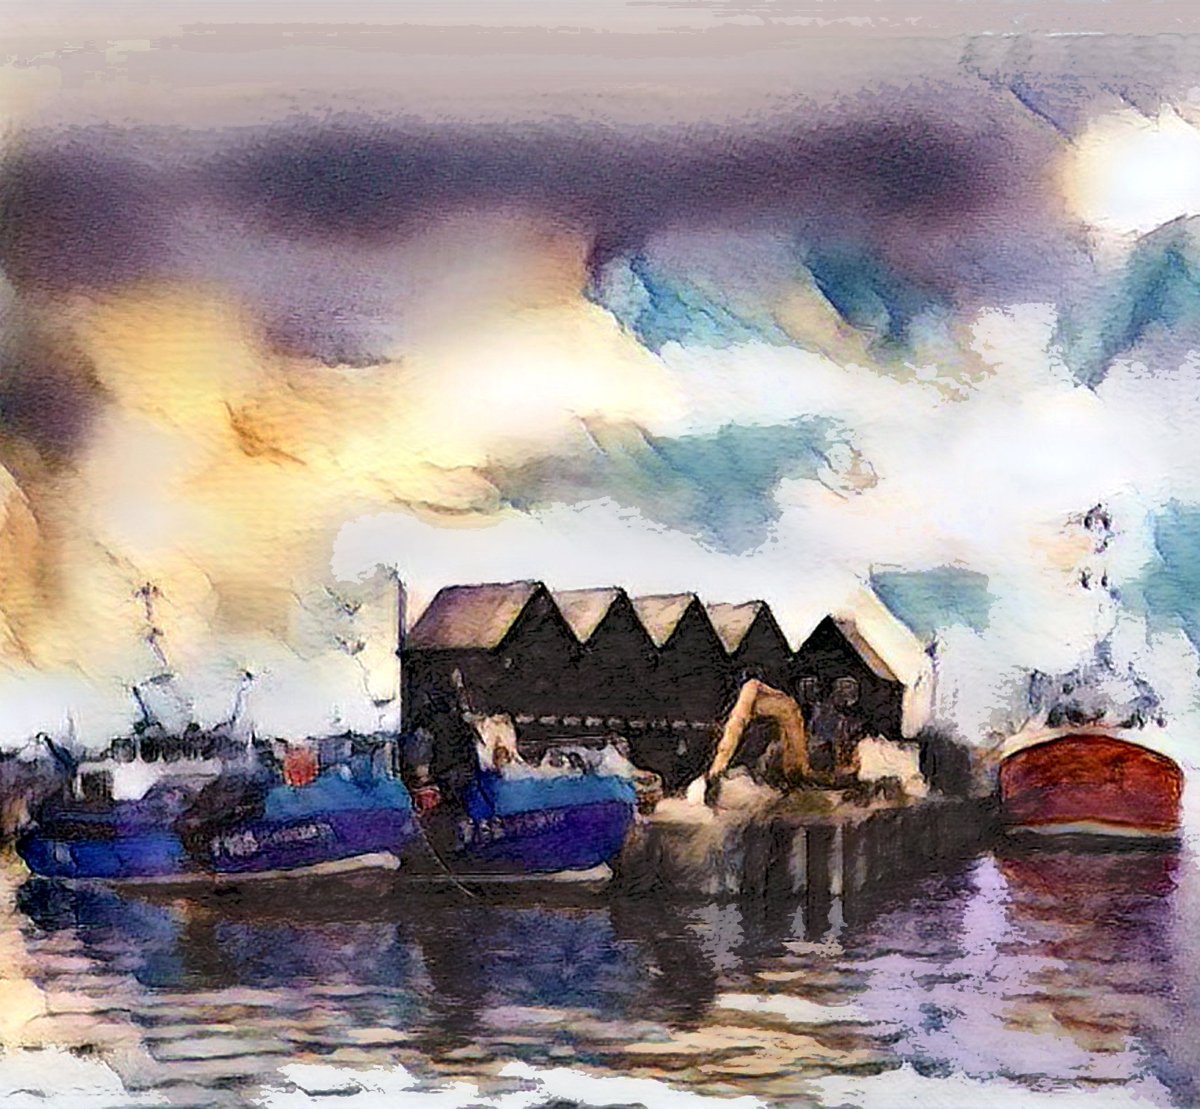 Must go to #Whitstable harbour this bank holiday - lots to see and do love it #harbour #seaside #kentcoast #painting #harbourside #boats #weekend #WednesdayMotivation #waterside #art #artwork #seasidesheds #fun #walking #dayout #waterside #paint #artist #pleasure #seasalter